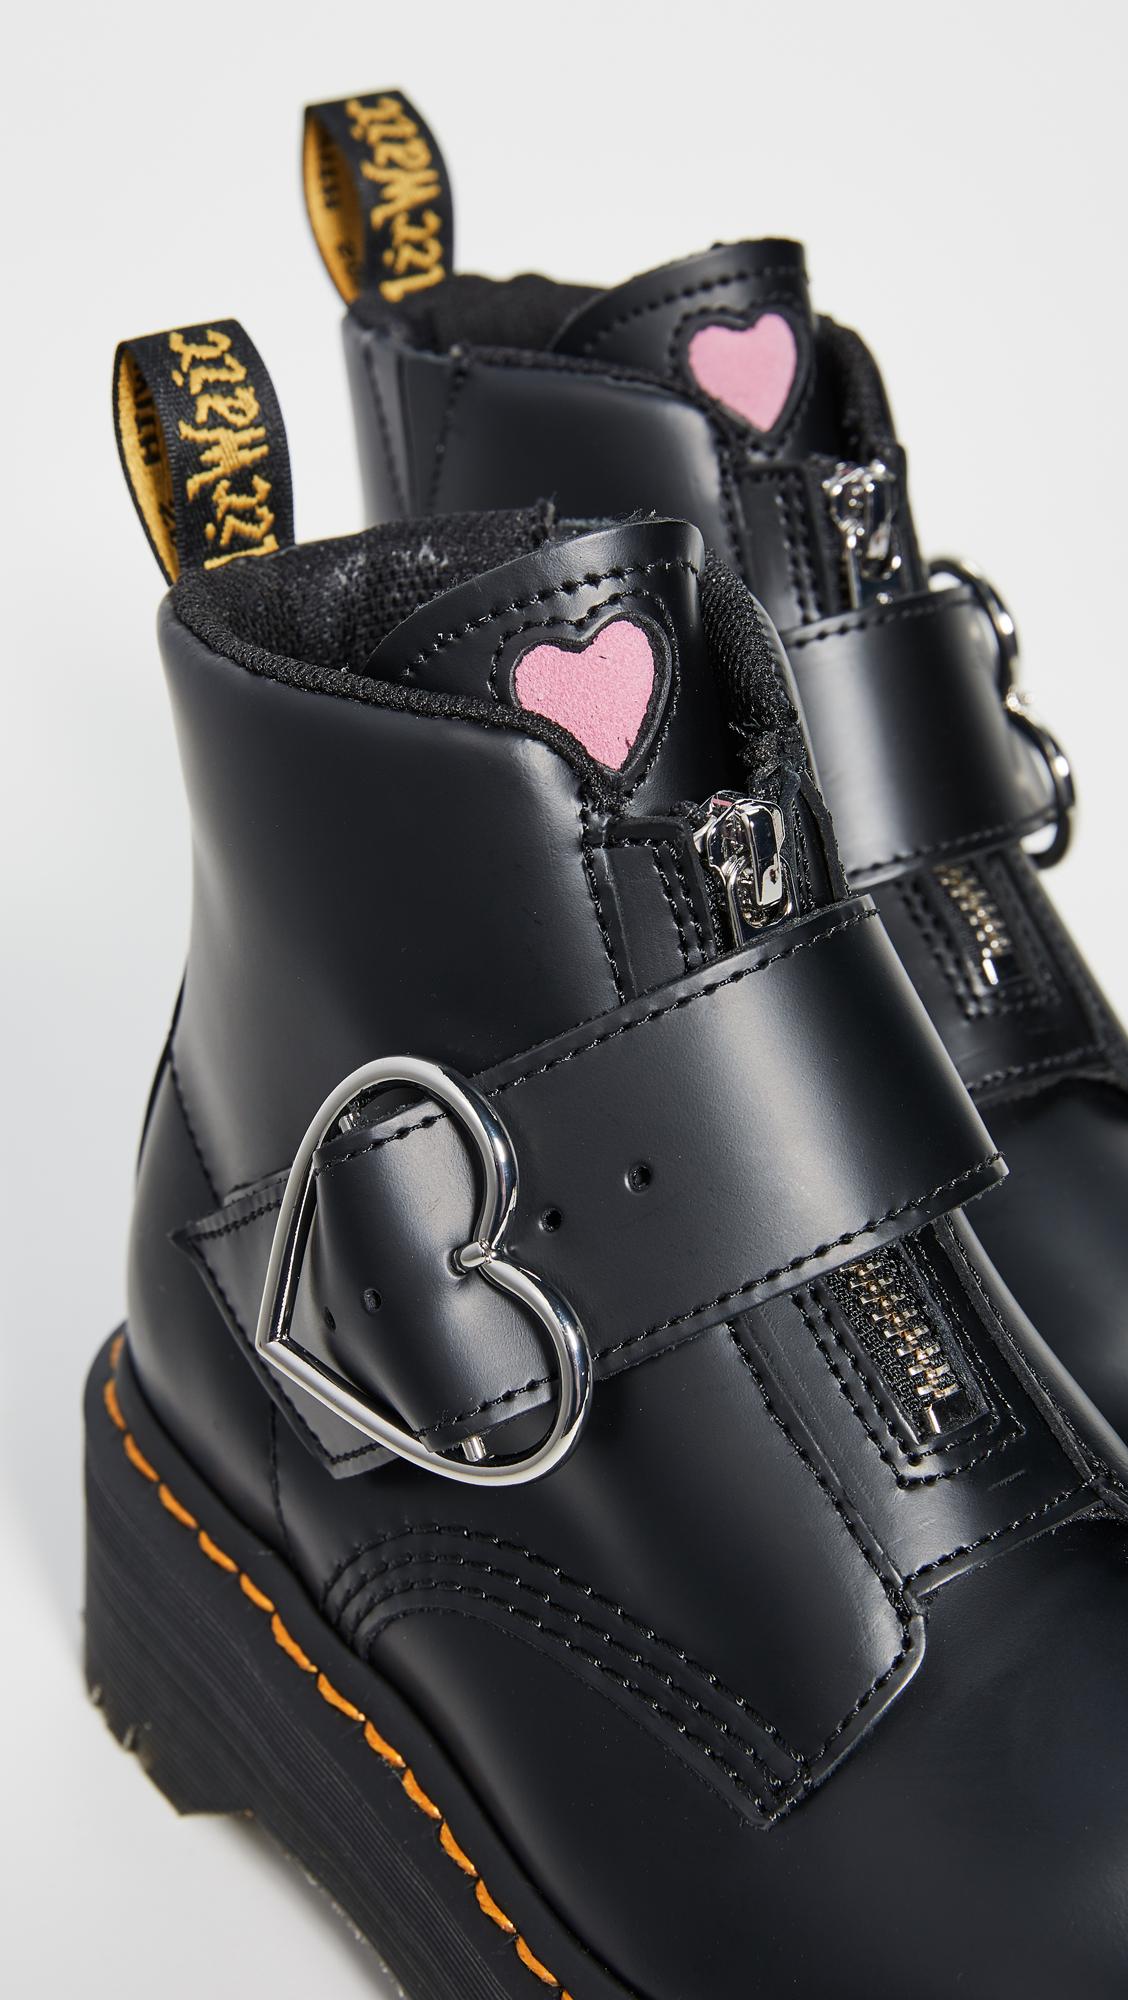 Dr. Martens Buckle Boot Lazy Oaf in Black | Lyst